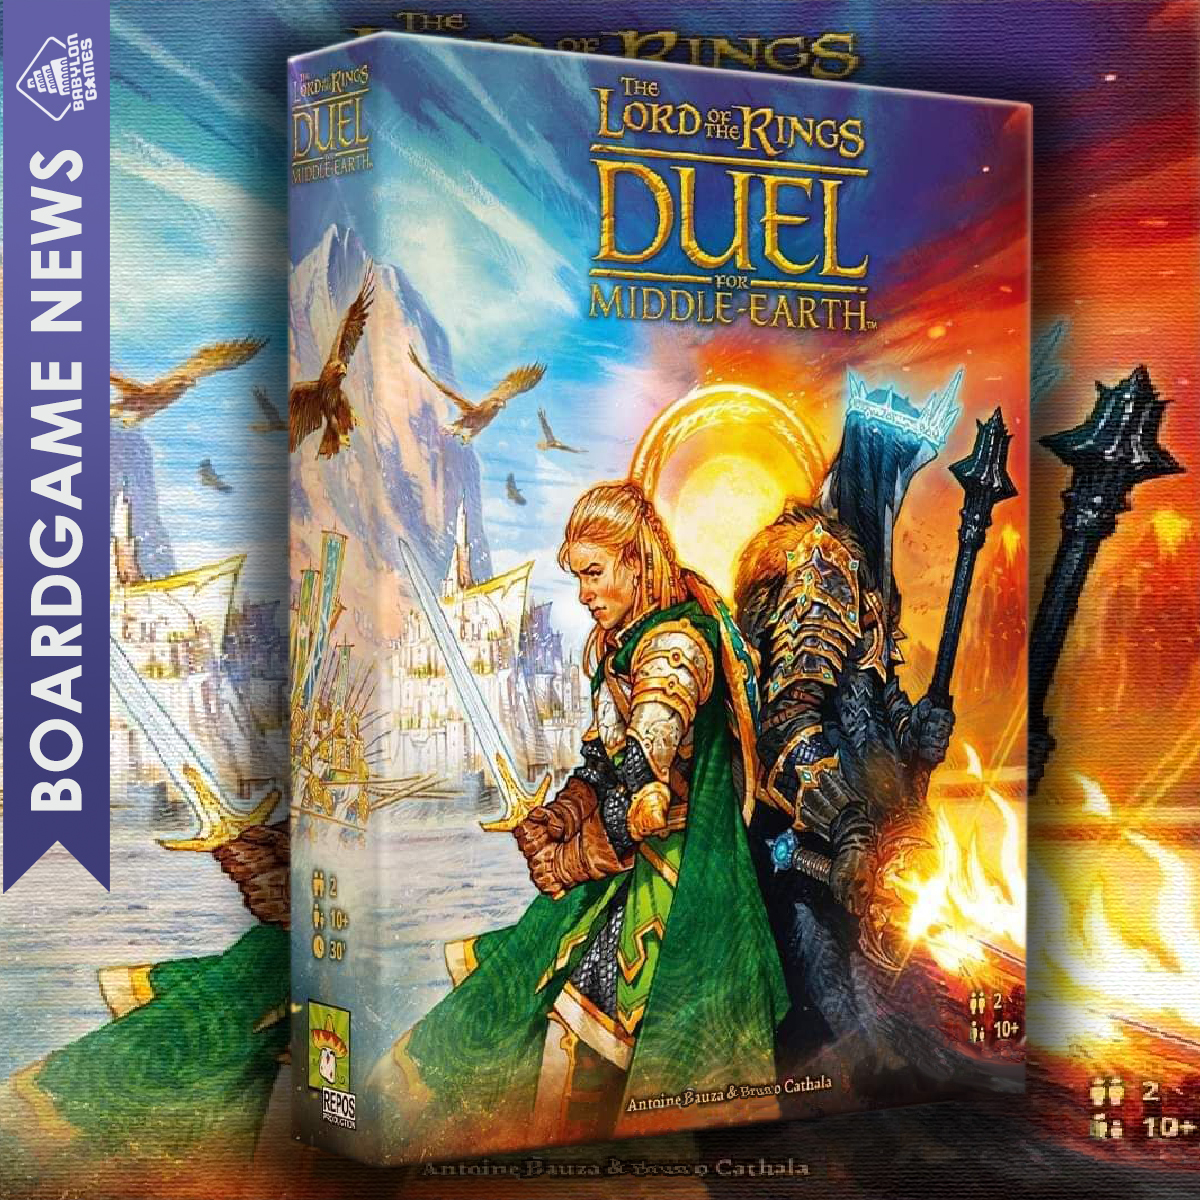 The Lord of the Rings: Duel for Middle-earth by @ReposProduction

📐: Antoine Bauza, Bruno Cathala
🎨: Vincent Dutrait
🧍: 2 players
⏱️: 30-45 min

boardgamegeek.com/boardgame/4210…

#boardgames #geek #meeple #brettspiele #game #graplanszowa #jeuxdesociete  #ボードゲーム  #보드게임 #LOTR